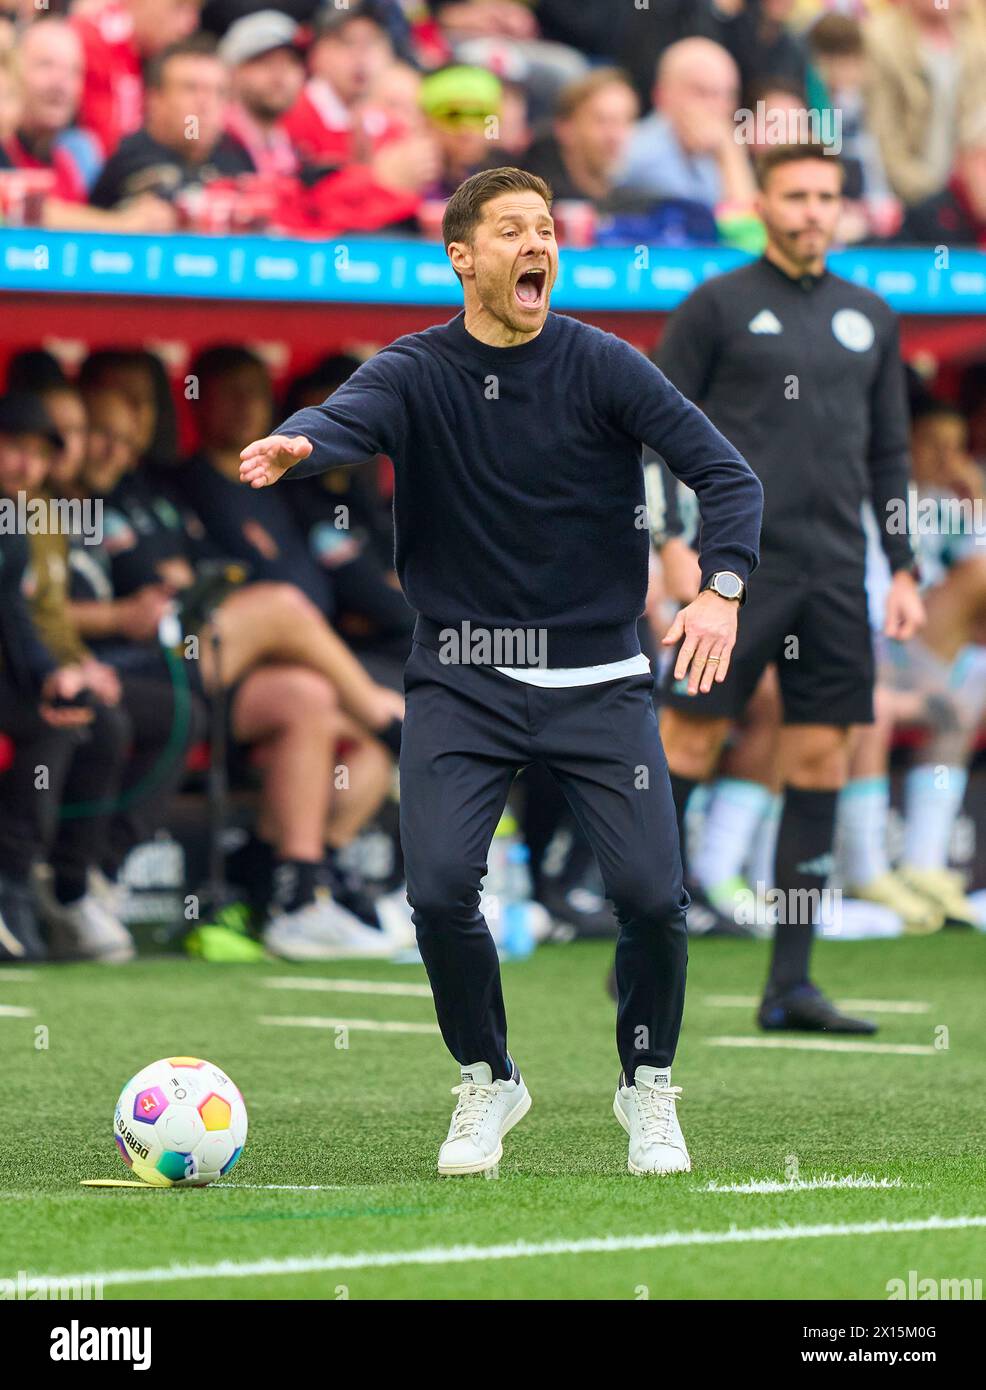 Xabi Alonso, Trainer, headcoach teammanager Leverkusen   in the match BAYER 04 LEVERKUSEN - SV WERDER BREMEN   on April 14, 2024 in Leverkusen, Germany. Season 2023/2024, 1.Bundesliga,, matchday 29, 29.Spieltag © Peter Schatz / Alamy Live News    - DFL REGULATIONS PROHIBIT ANY USE OF PHOTOGRAPHS as IMAGE SEQUENCES and/or QUASI-VIDEO - Stock Photo